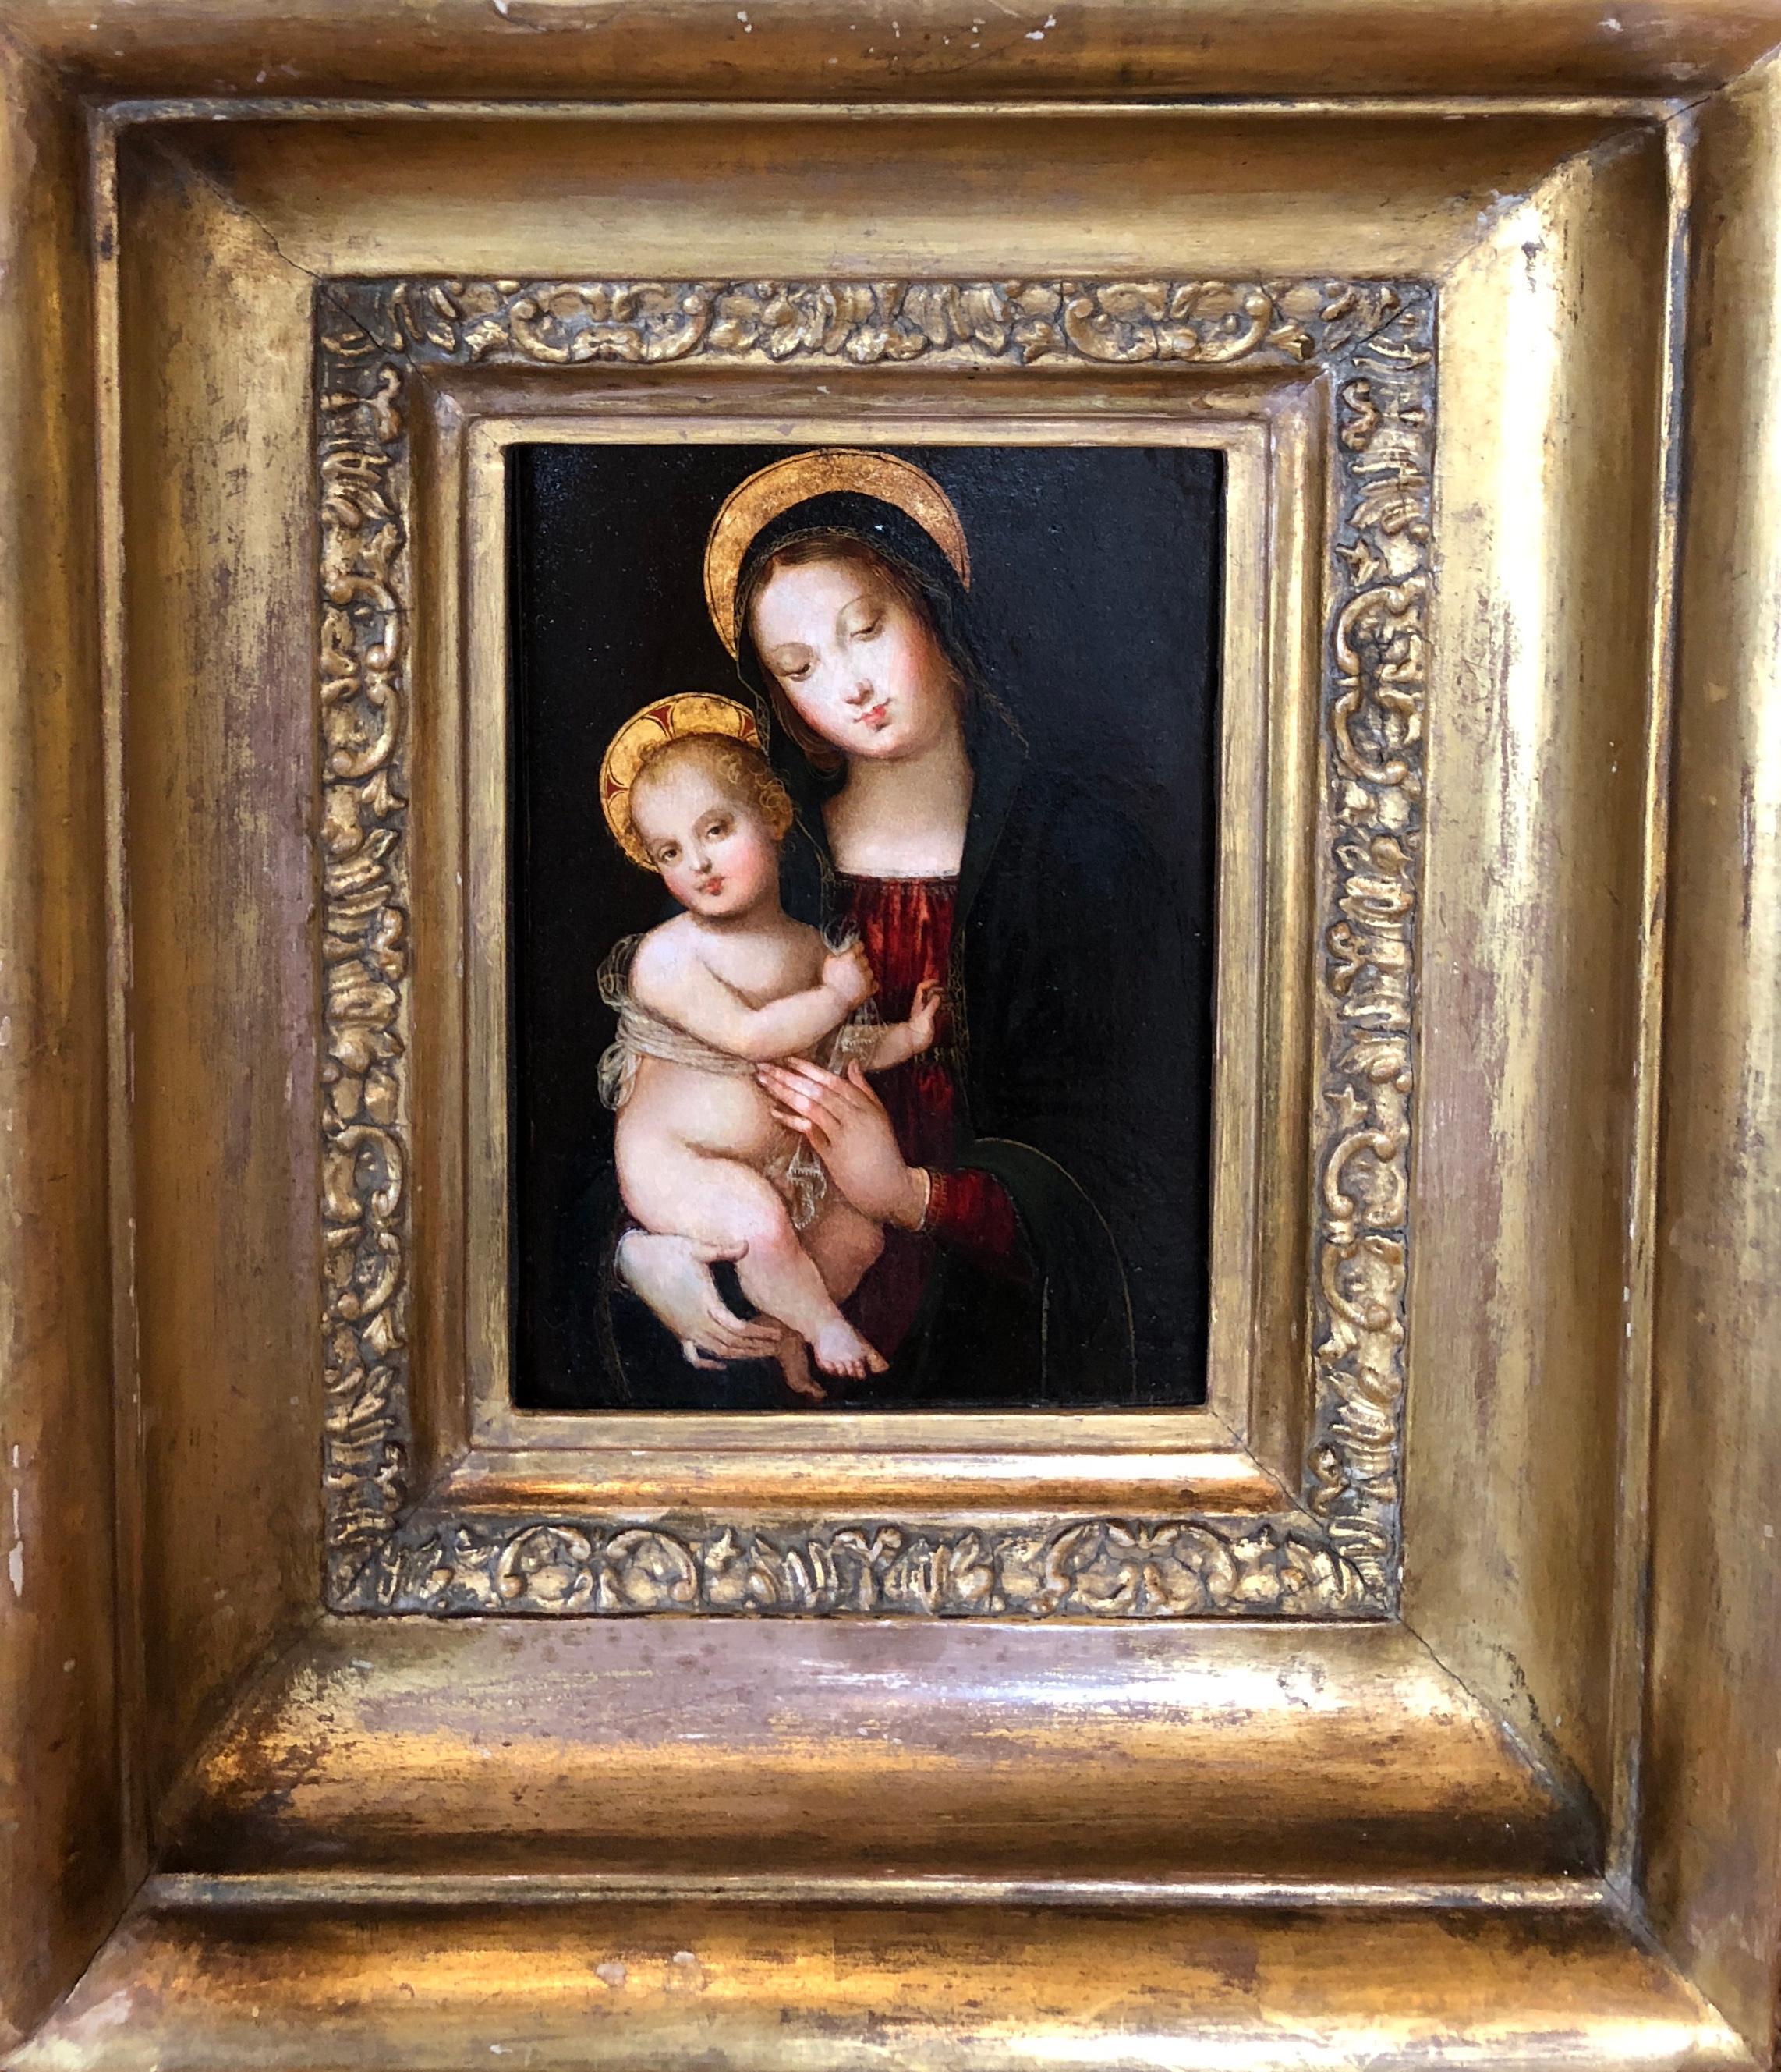 Madonna and Child - Black Figurative Painting by Lo Spagna